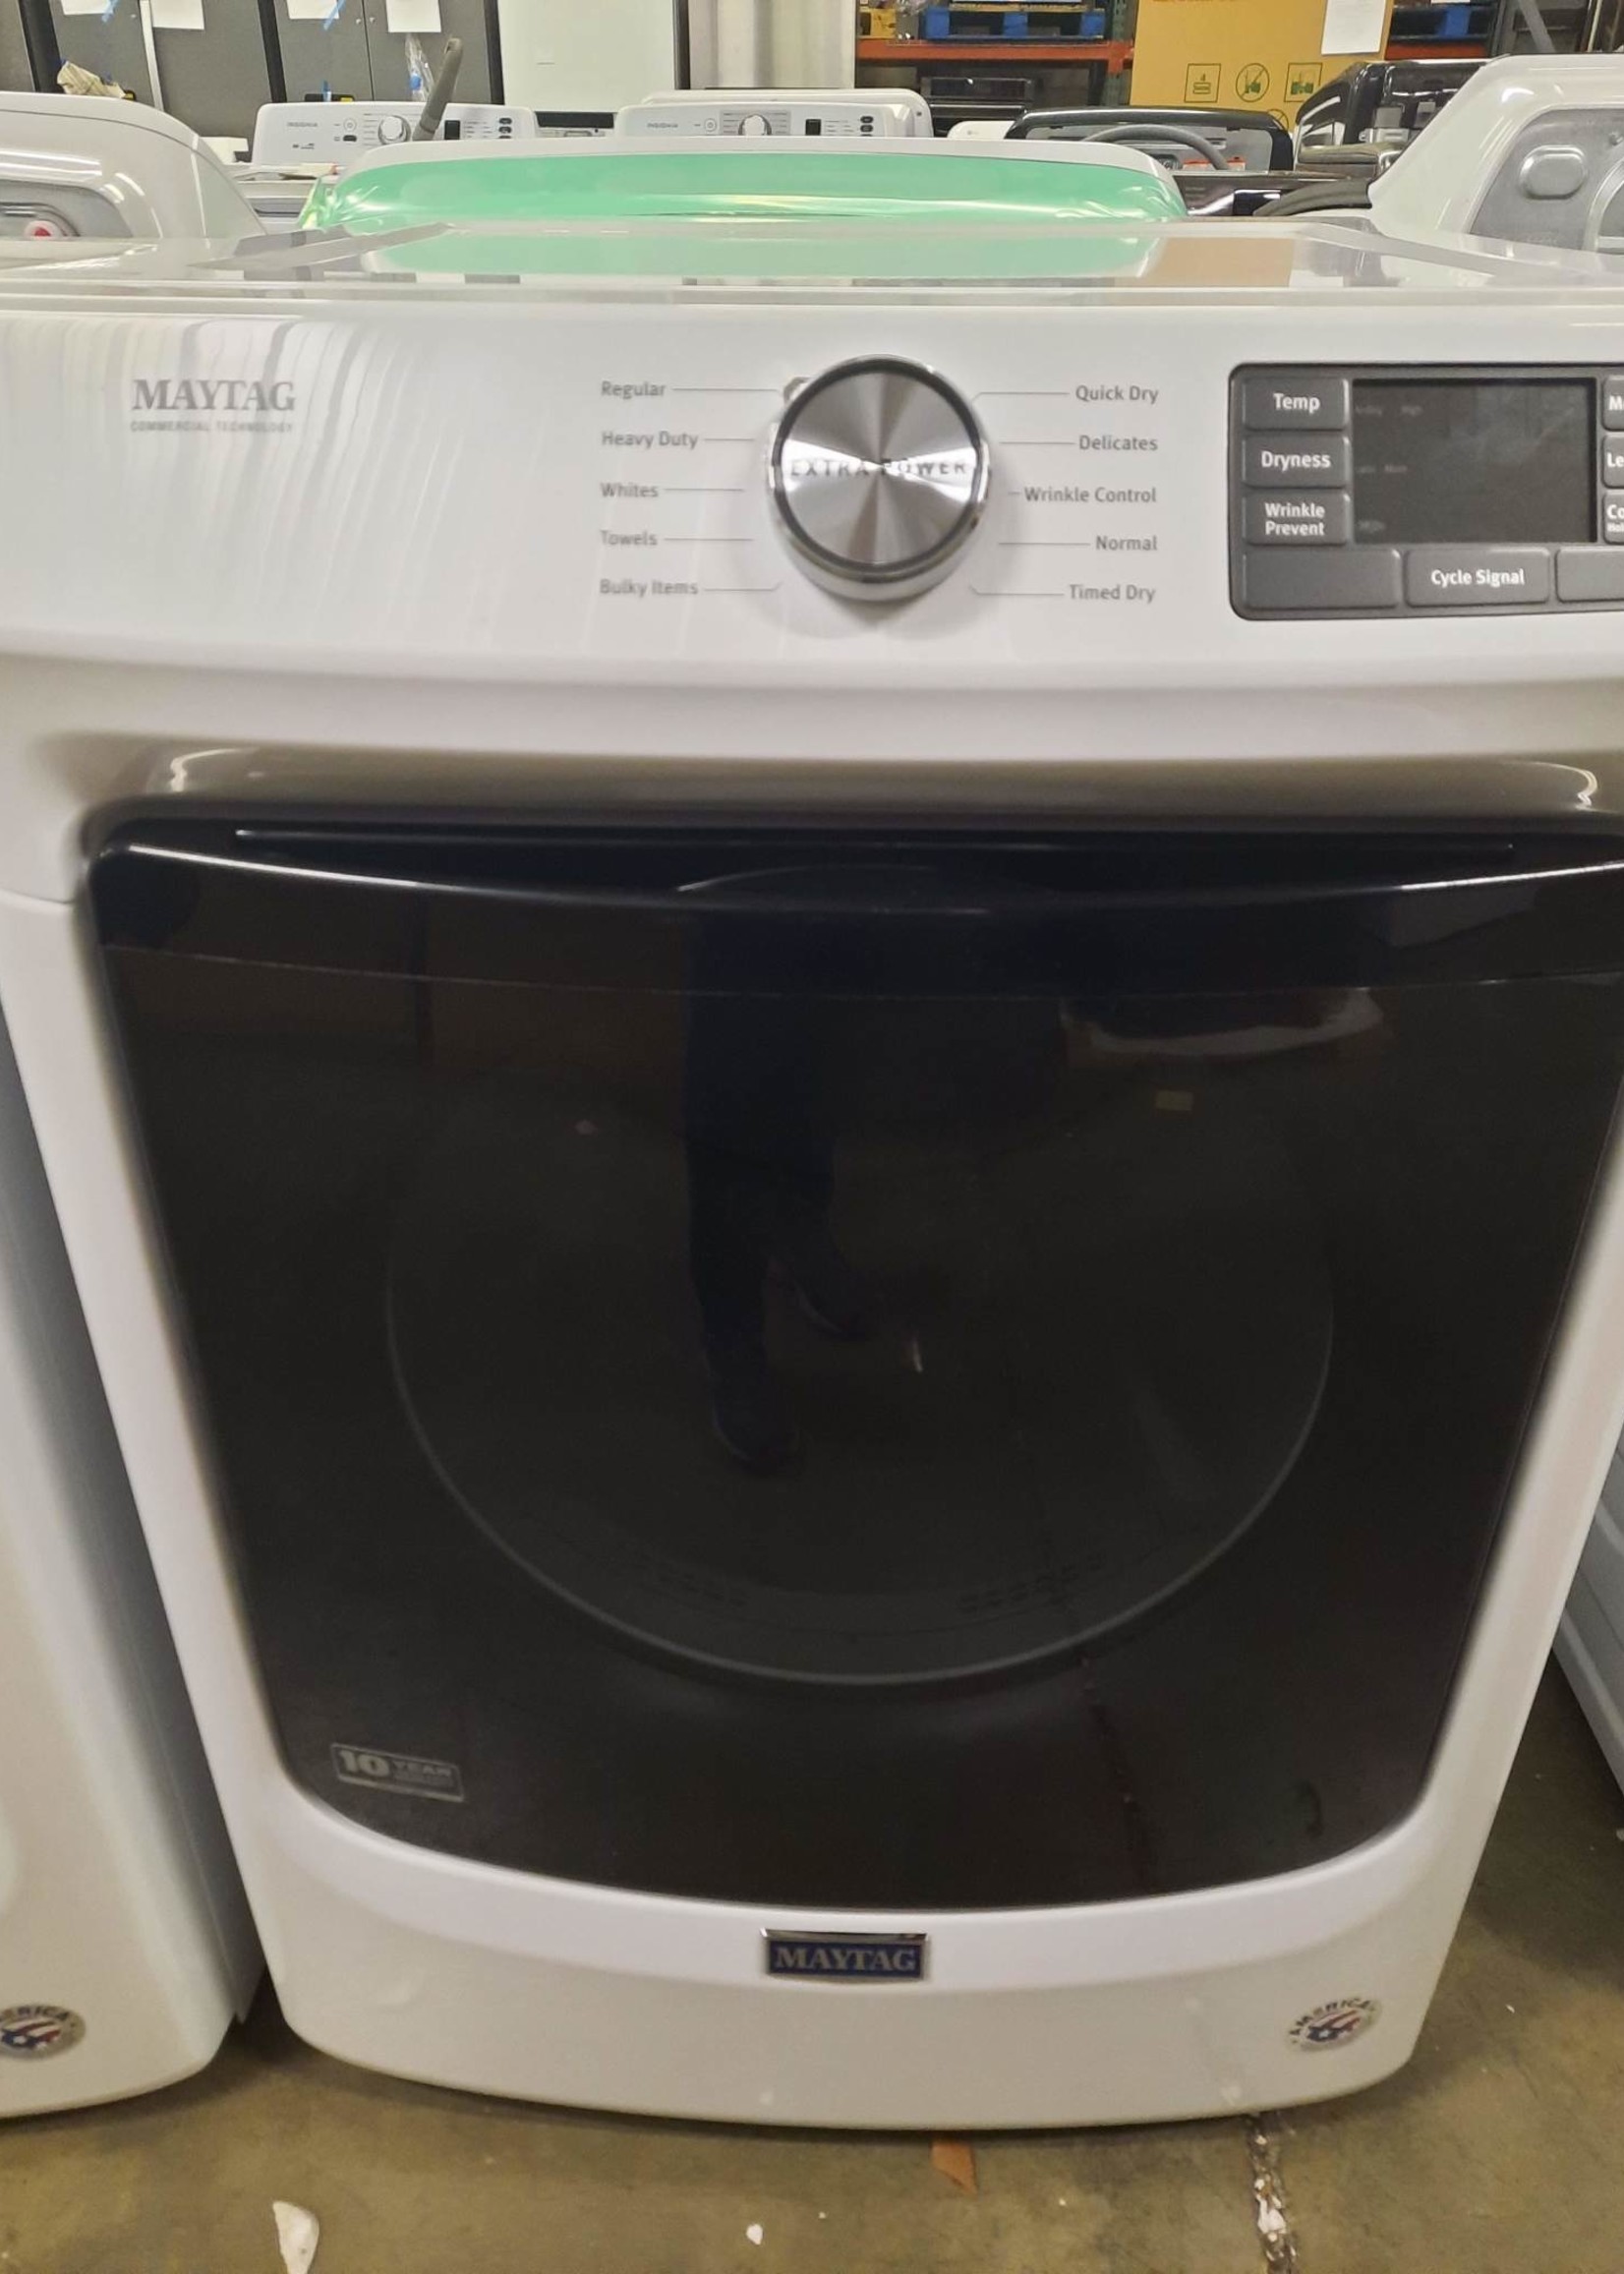 Maytag *Maytag MED5630HW  7.3 Cu. Ft. Stackable Electric Dryer with Extra Power Button - White